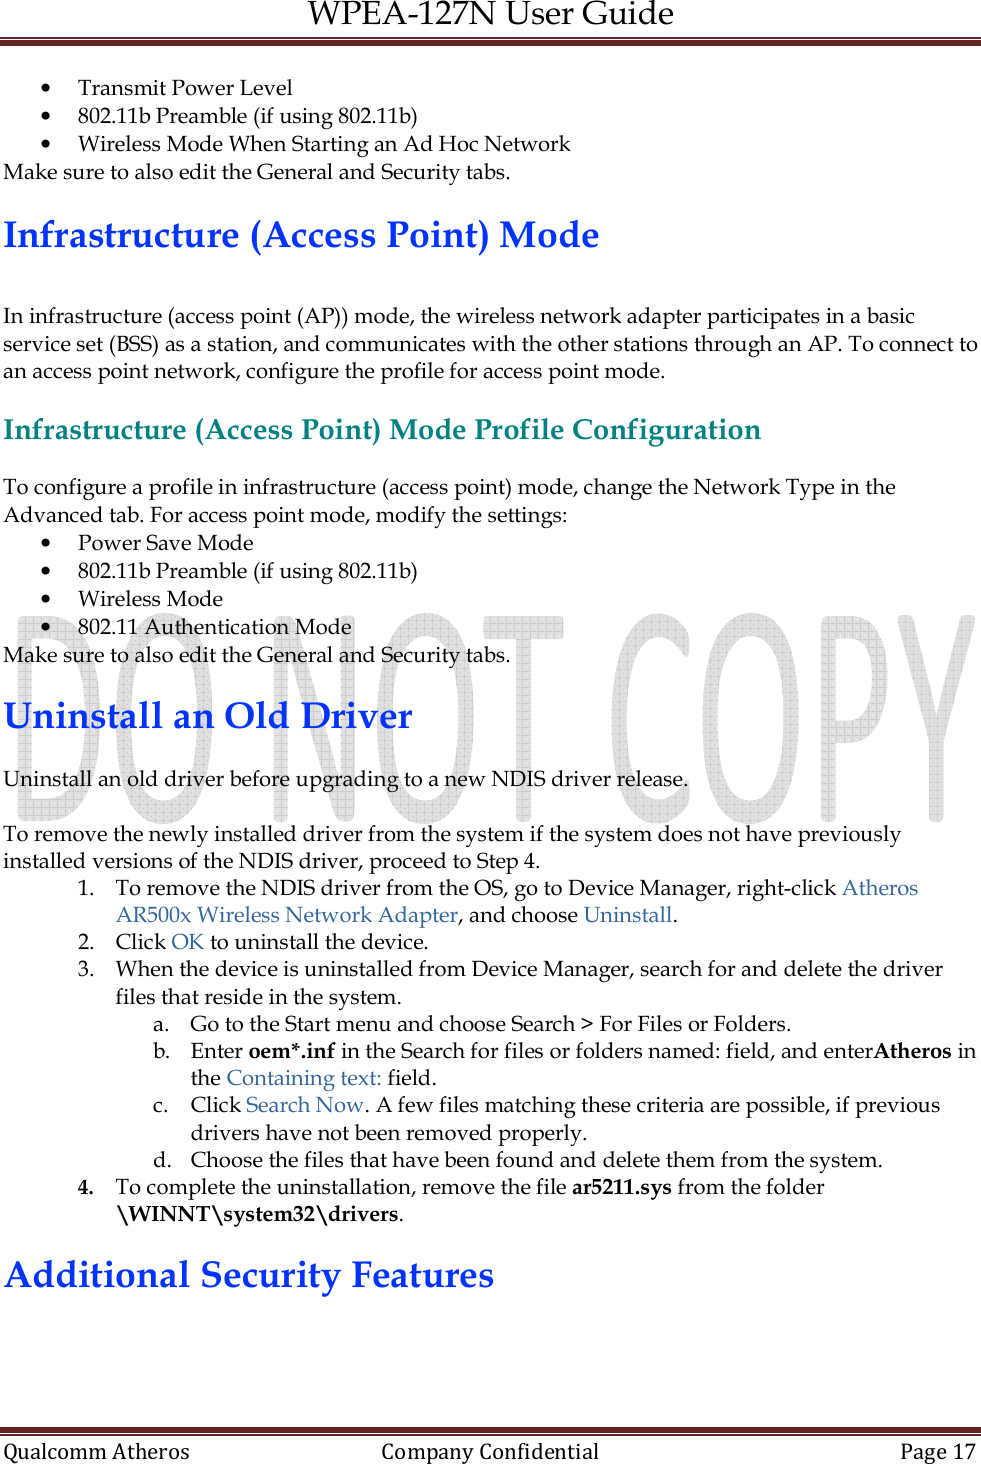 WPEA-127N User Guide  Qualcomm Atheros   Company Confidential  Page 17  • Transmit Power Level • 802.11b Preamble (if using 802.11b) • Wireless Mode When Starting an Ad Hoc Network Make sure to also edit the General and Security tabs.  Infrastructure (Access Point) Mode   In infrastructure (access point (AP)) mode, the wireless network adapter participates in a basic service set (BSS) as a station, and communicates with the other stations through an AP. To connect to an access point network, configure the profile for access point mode.  Infrastructure (Access Point) Mode Profile Configuration  To configure a profile in infrastructure (access point) mode, change the Network Type in the Advanced tab. For access point mode, modify the settings: • Power Save Mode • 802.11b Preamble (if using 802.11b) • Wireless Mode • 802.11 Authentication Mode Make sure to also edit the General and Security tabs.  Uninstall an Old Driver  Uninstall an old driver before upgrading to a new NDIS driver release.  To remove the newly installed driver from the system if the system does not have previously installed versions of the NDIS driver, proceed to Step 4. 1. To remove the NDIS driver from the OS, go to Device Manager, right-click Atheros AR500x Wireless Network Adapter, and choose Uninstall. 2. Click OK to uninstall the device. 3. When the device is uninstalled from Device Manager, search for and delete the driver files that reside in the system. a. Go to the Start menu and choose Search &gt; For Files or Folders. b. Enter oem*.inf in the Search for files or folders named: field, and enterAtheros in the Containing text: field. c. Click Search Now. A few files matching these criteria are possible, if previous drivers have not been removed properly. d. Choose the files that have been found and delete them from the system. 4. To complete the uninstallation, remove the file ar5211.sys from the folder \WINNT\system32\drivers.  Additional Security Features  